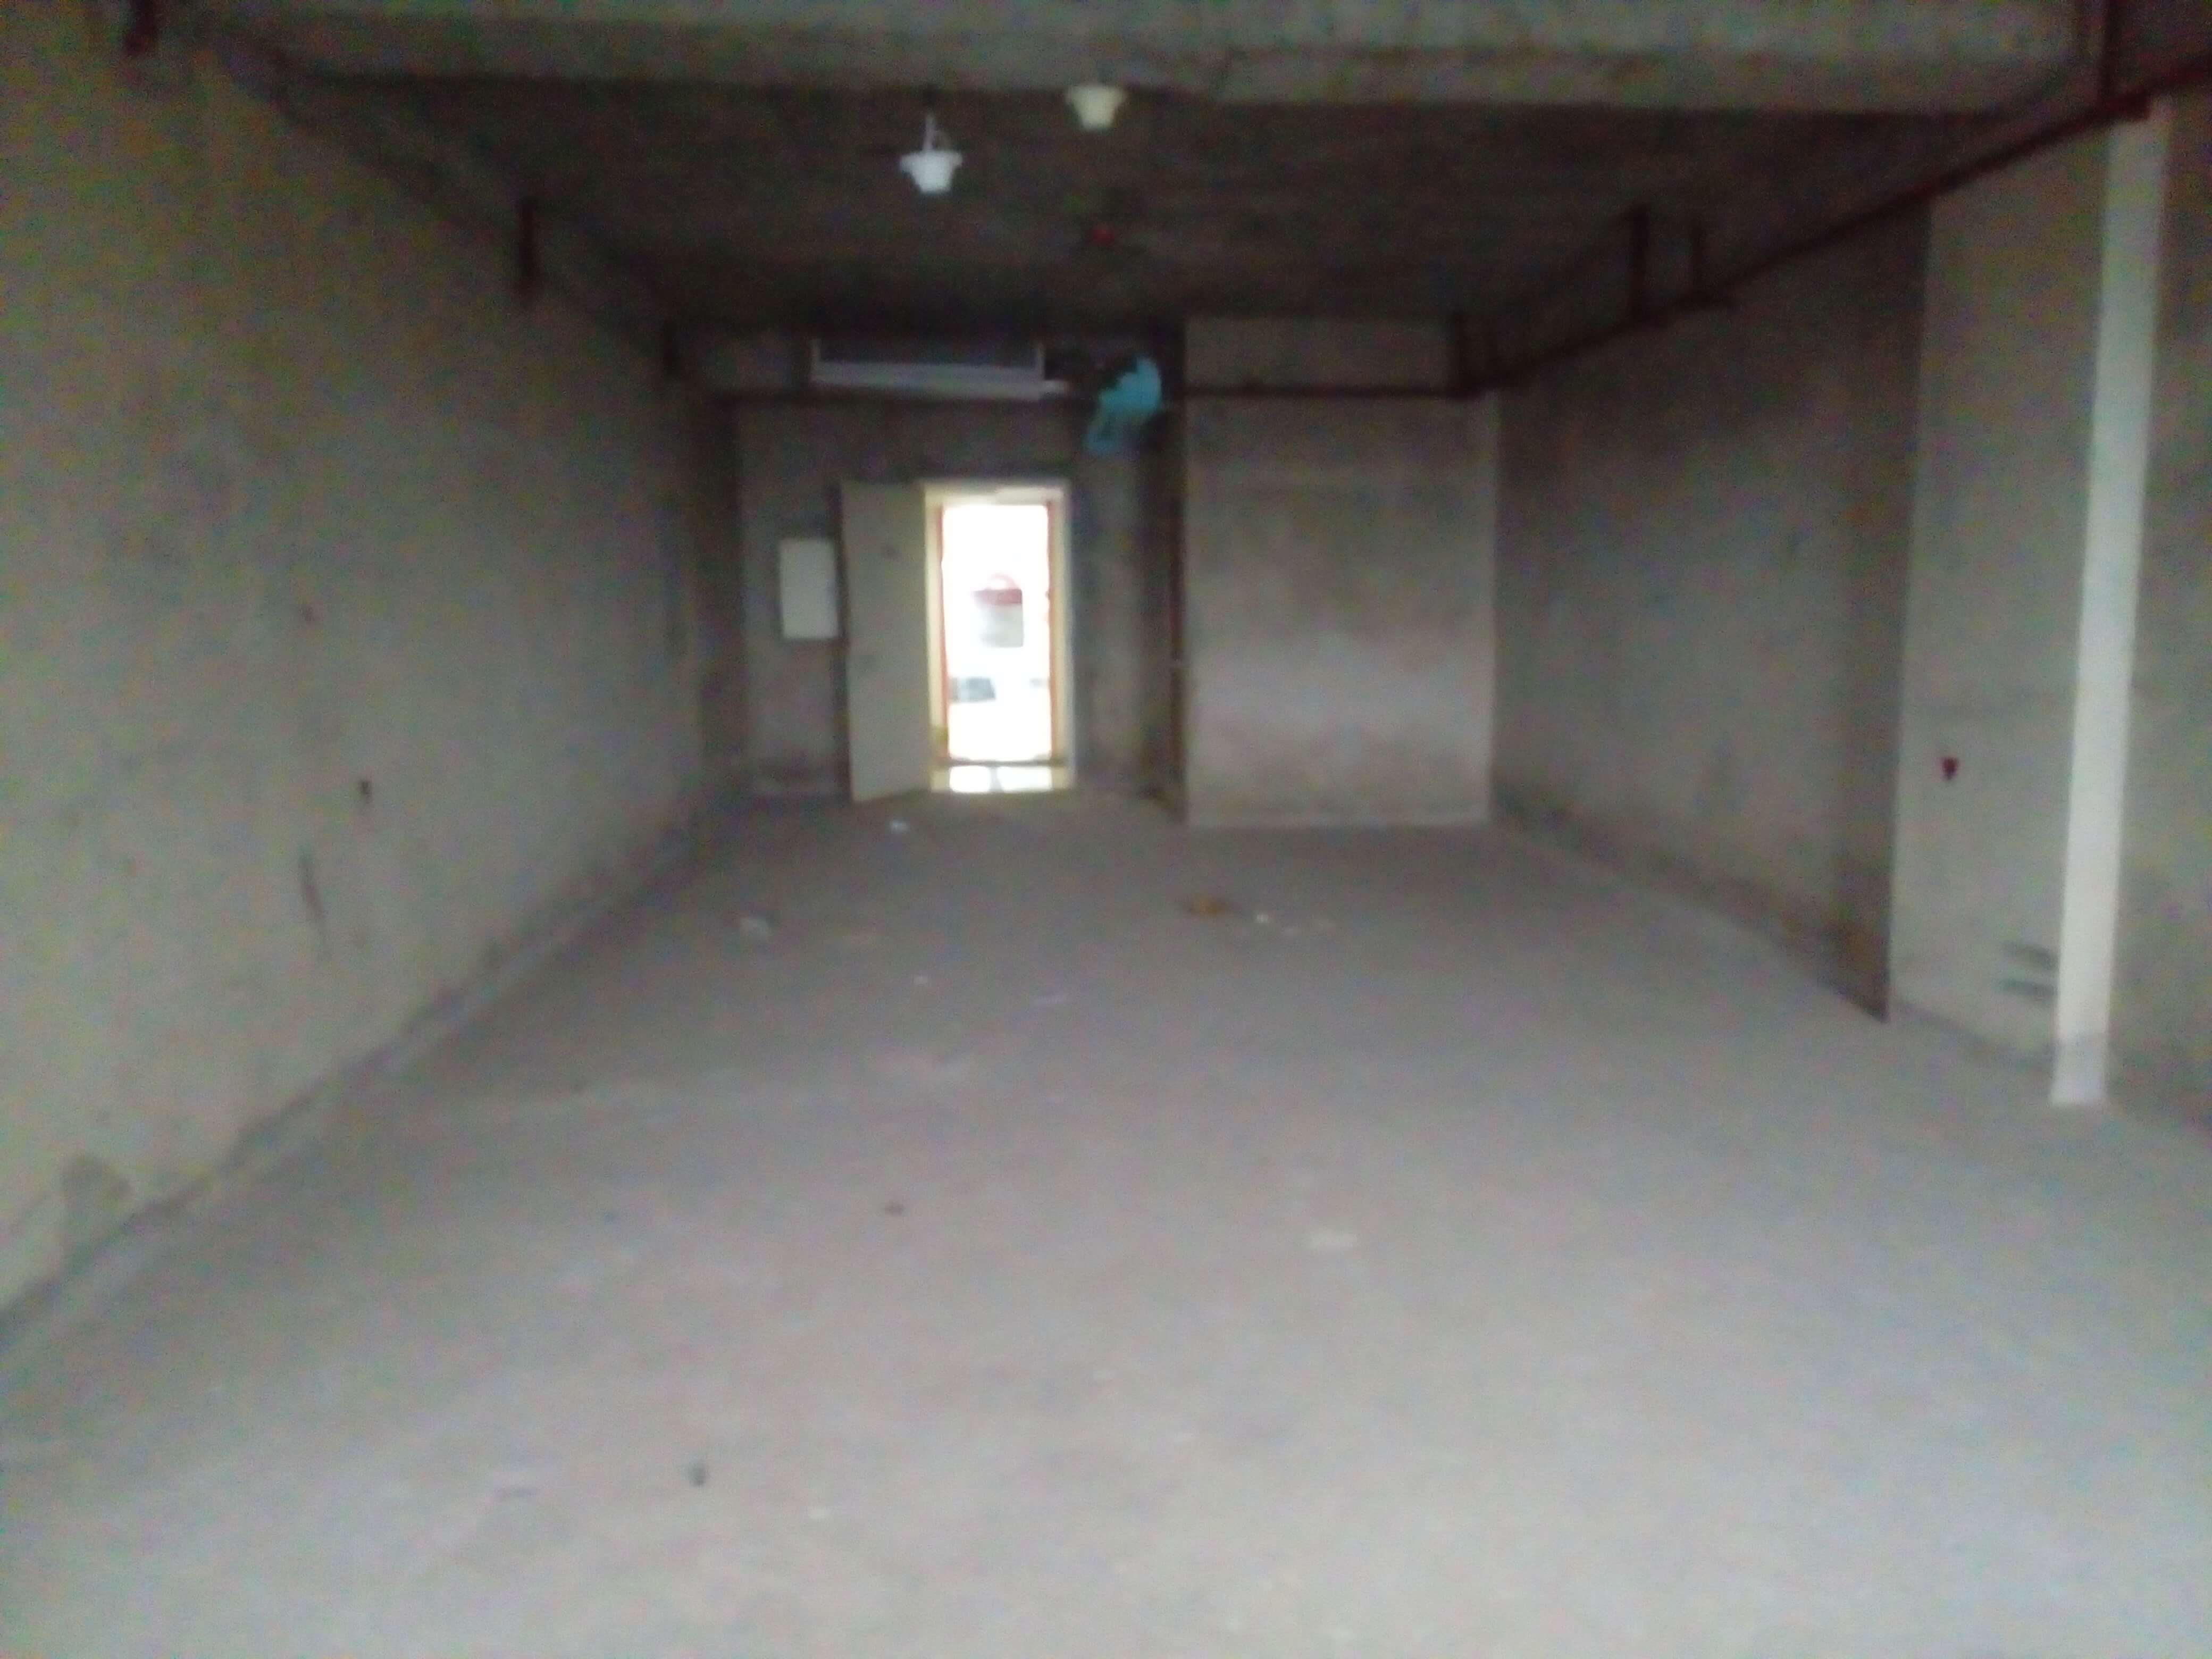 Office For Sale in New Town Kolkata (Id:10830)